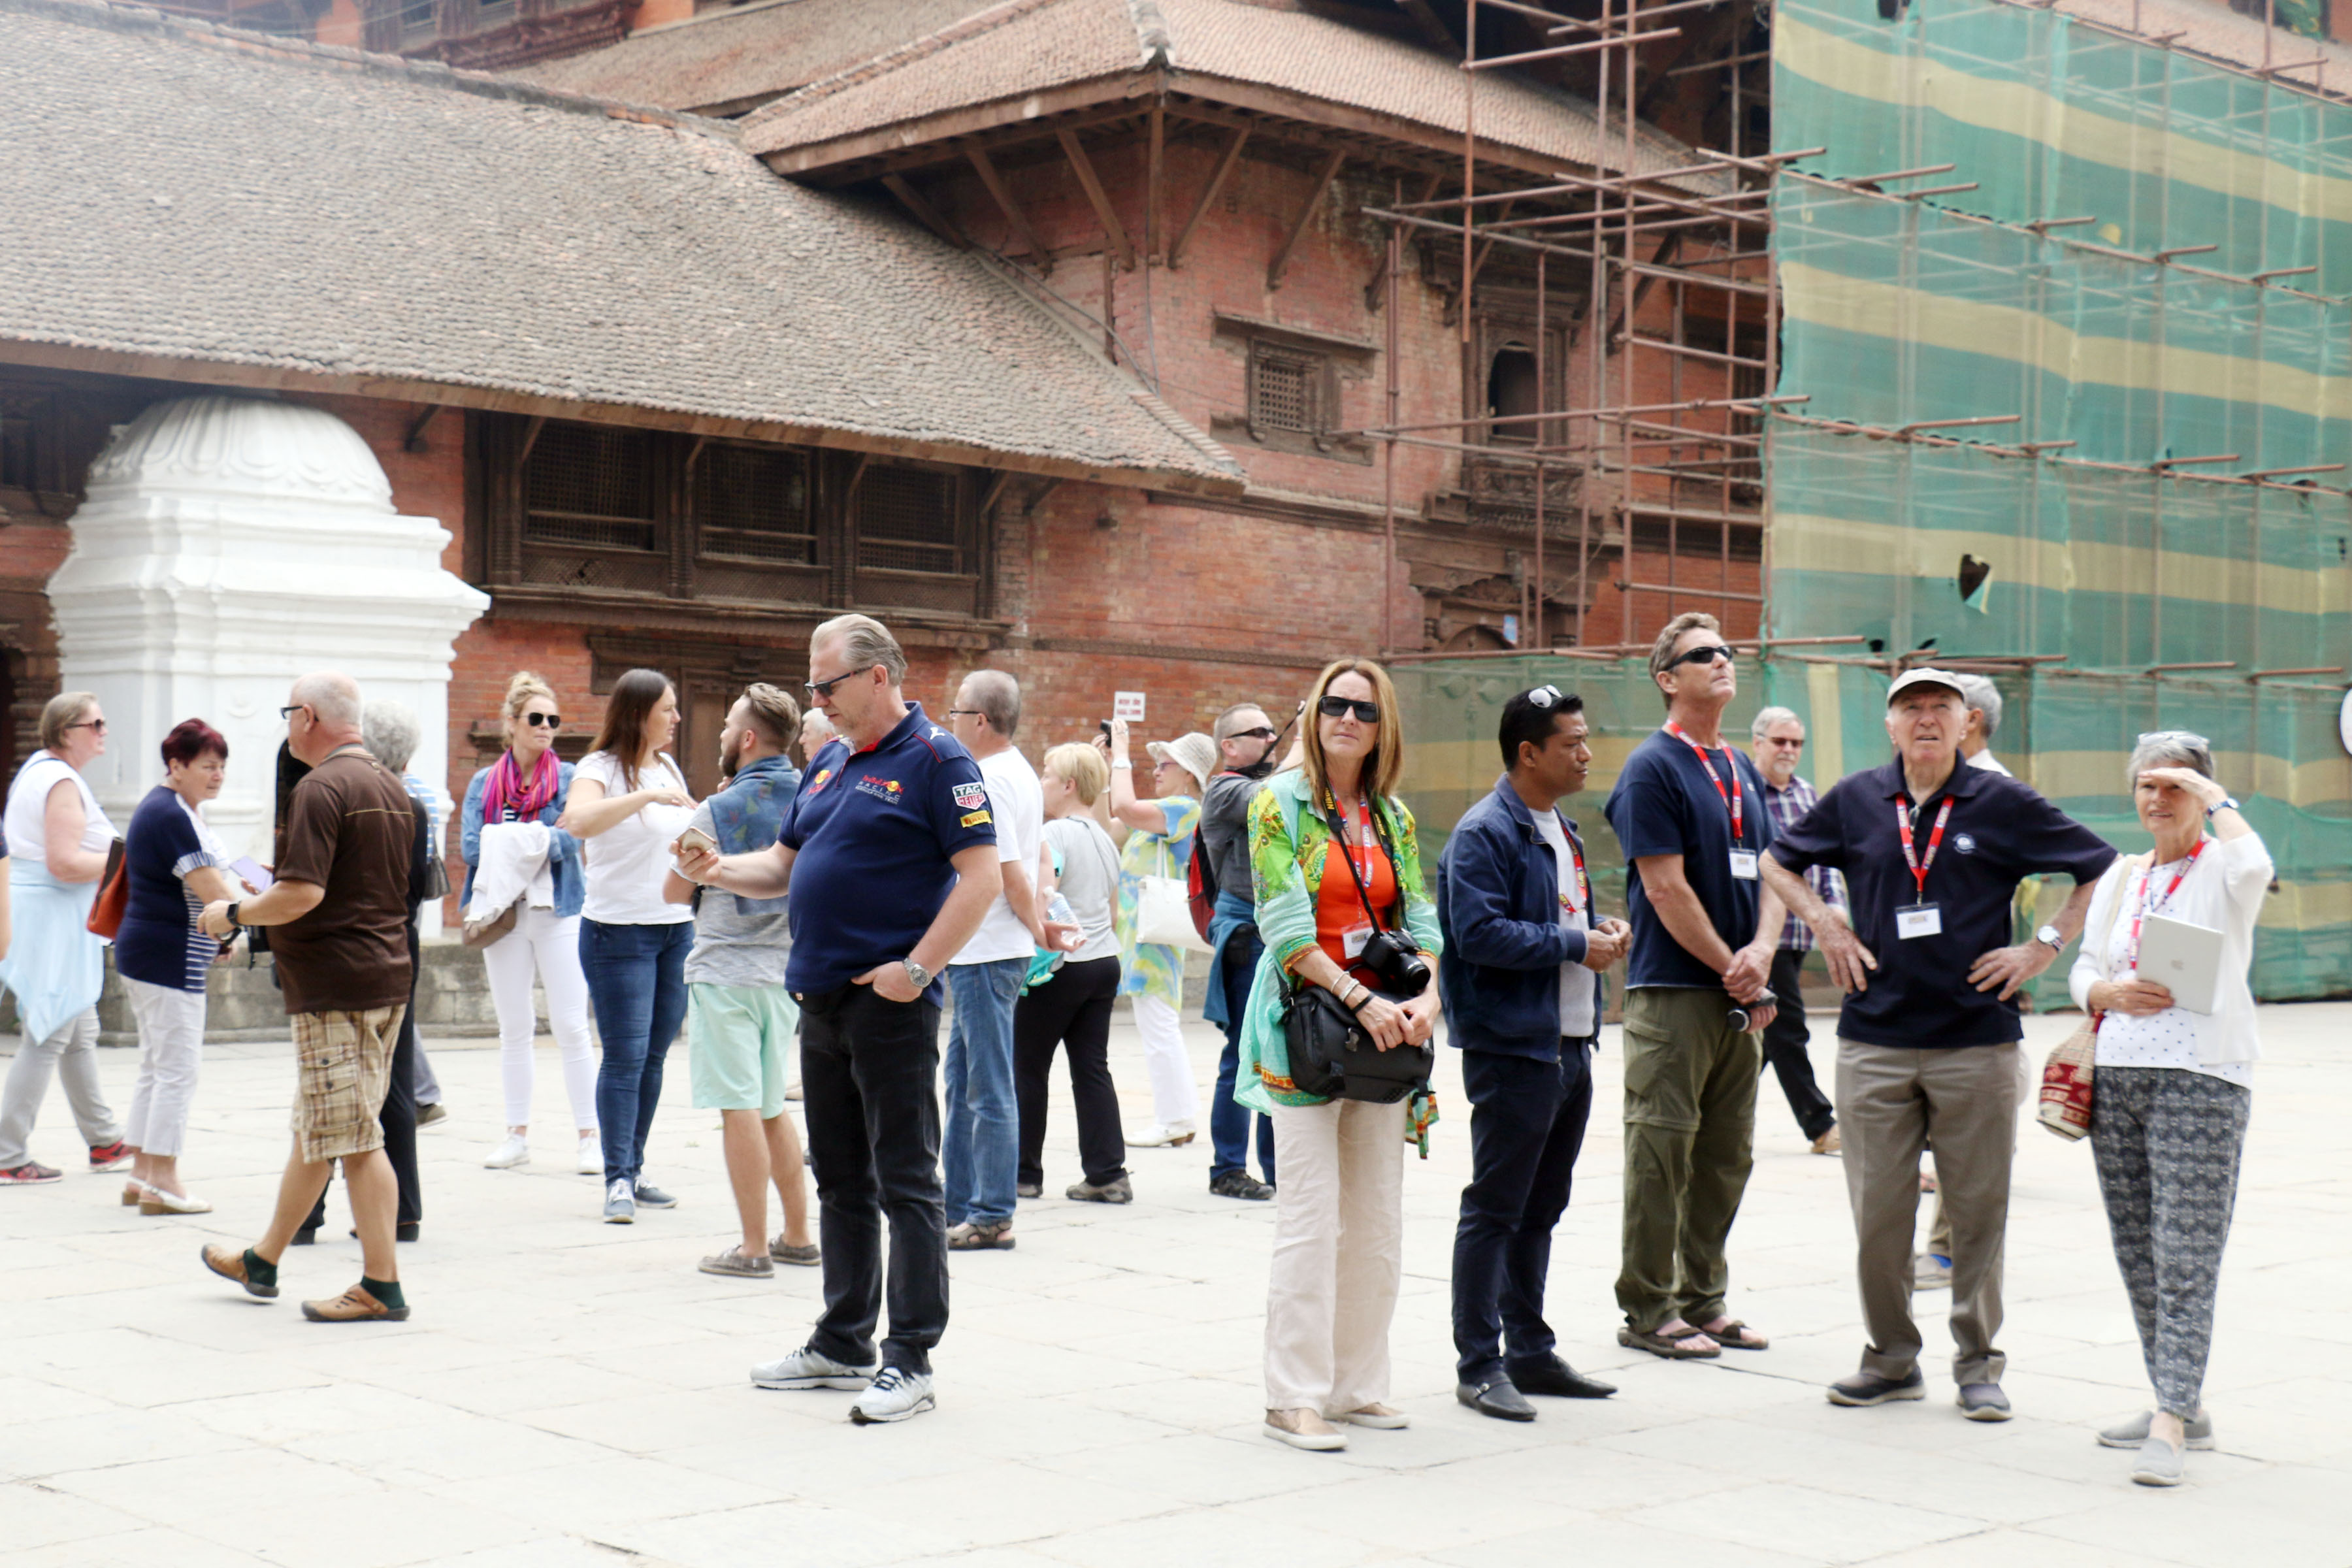 Nepal sees over 600 thousand foreign tourists in eight months